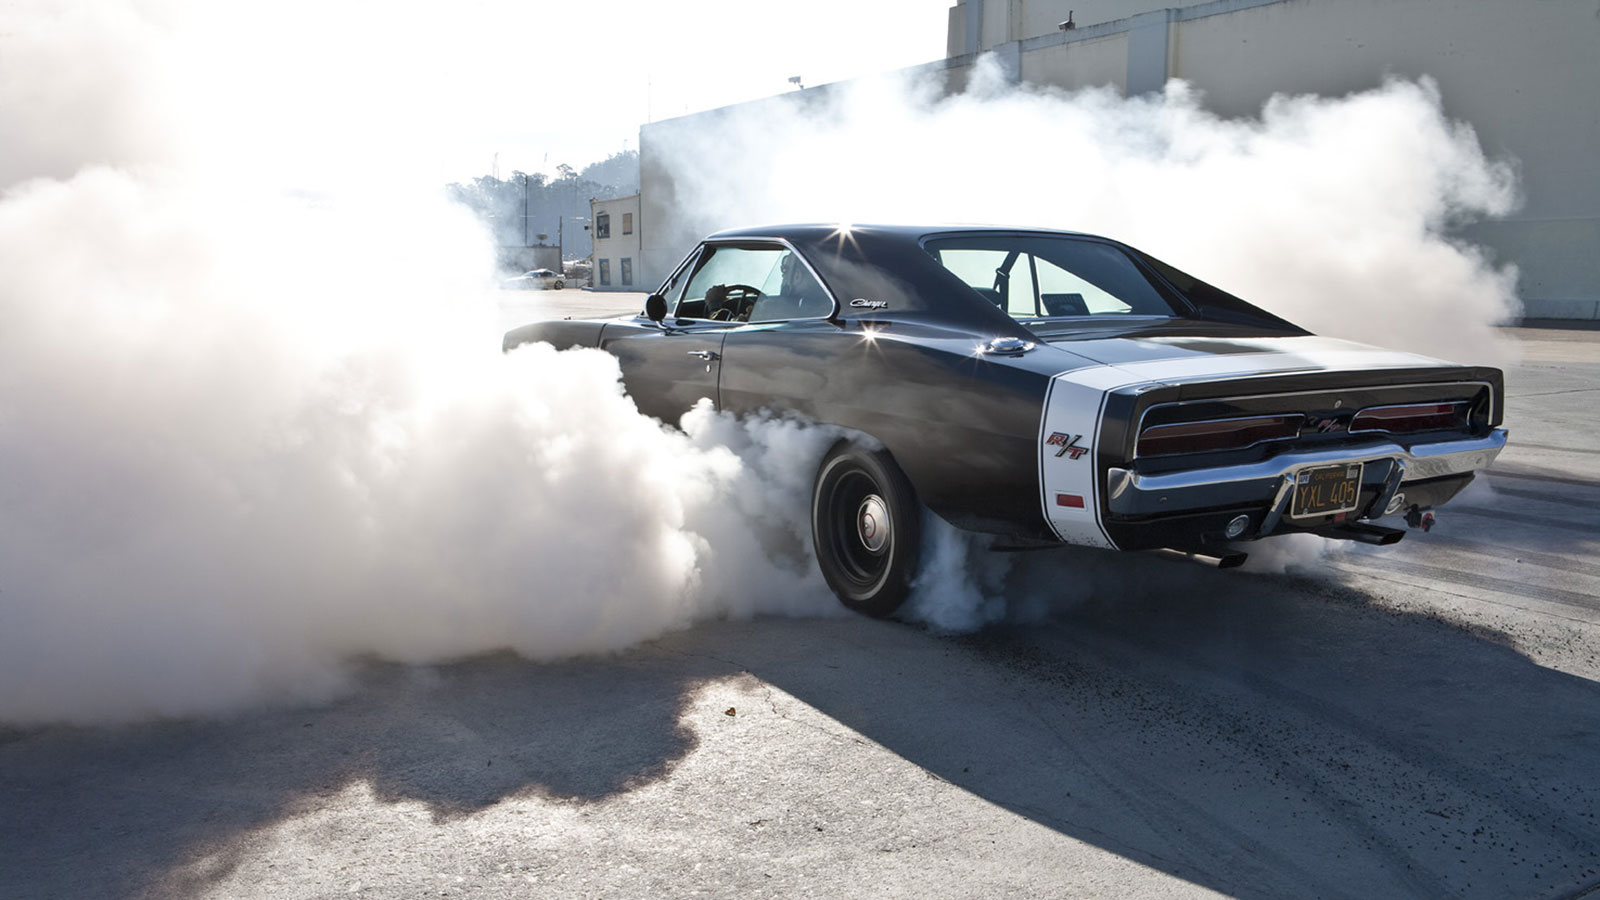 Rod Muscle Cars Burnout Race Track Drag Racing Wallpaper Background